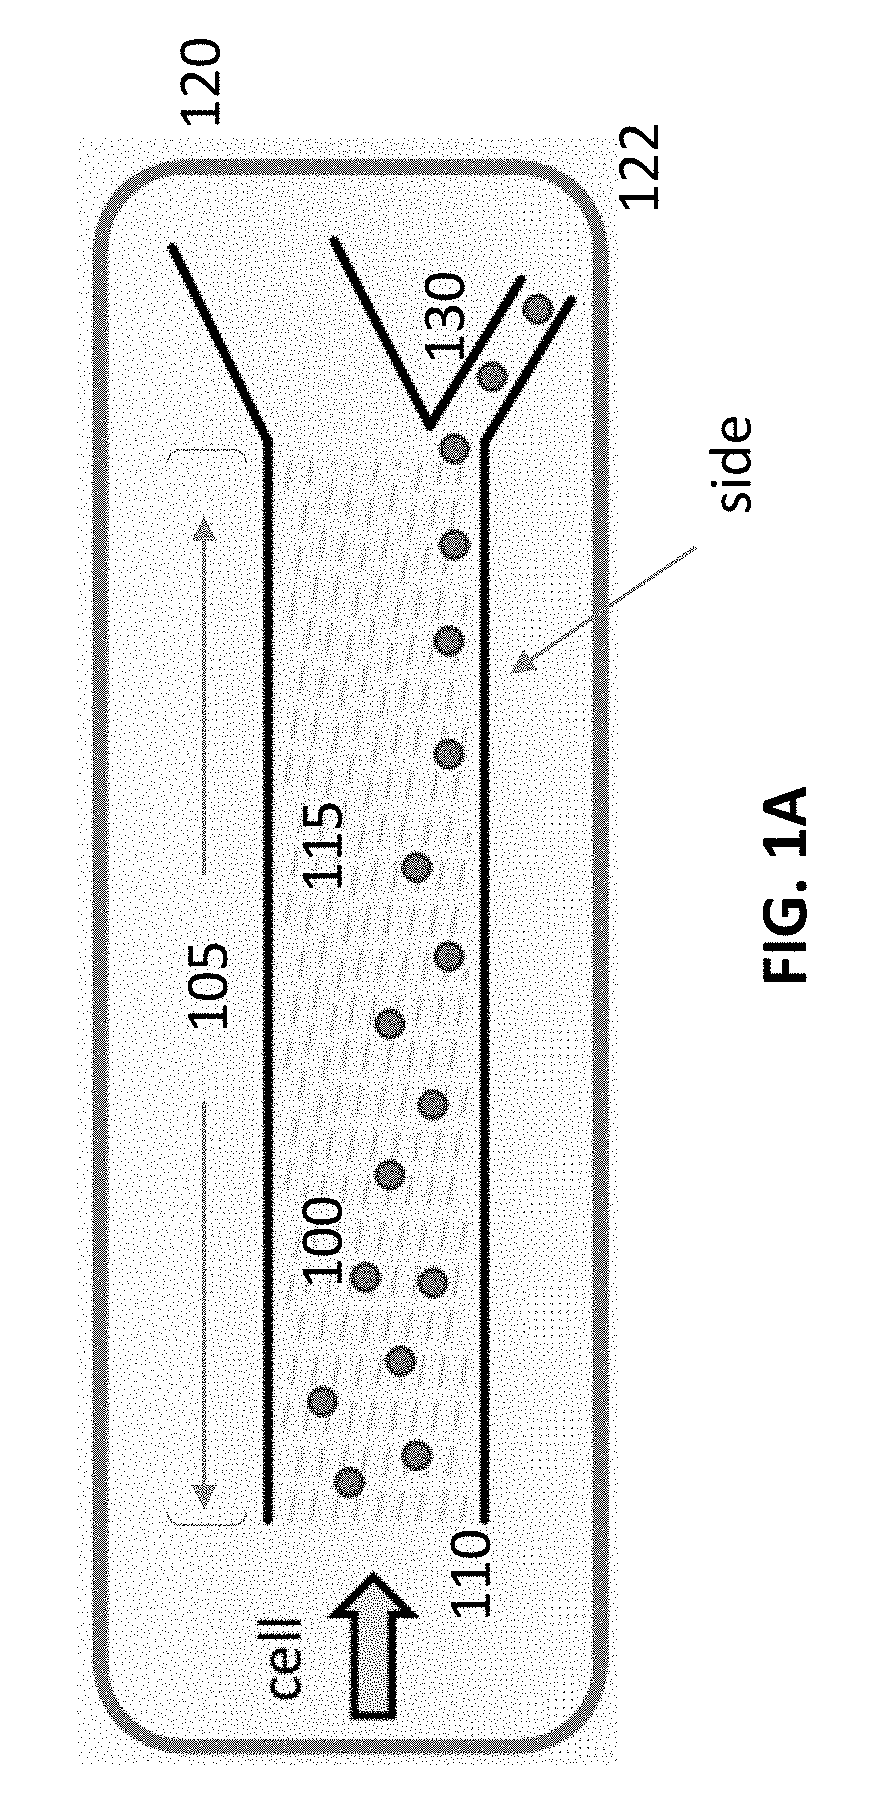 Microfluidic Cellular Device and Methods of Use Thereof